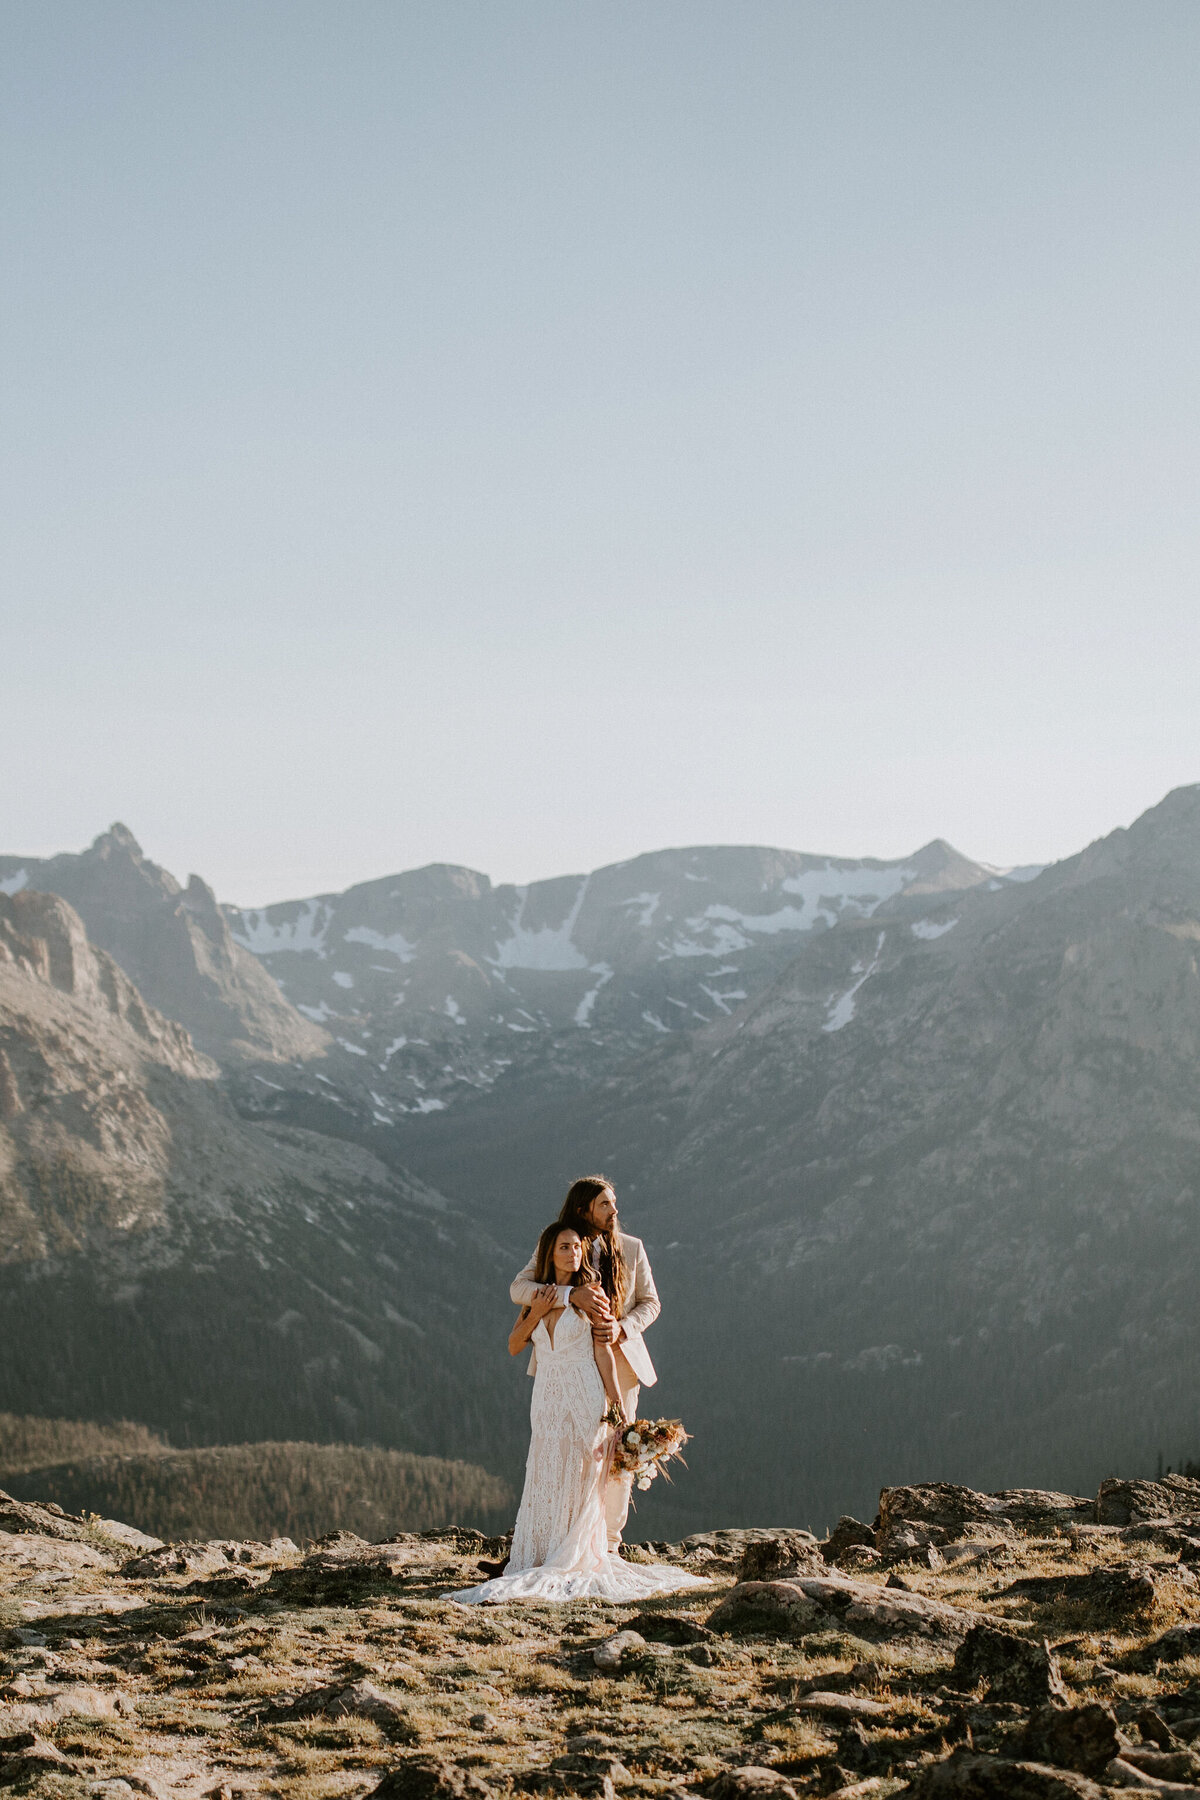 bride and groom wearing an ivory wedding gown and tuxedo pose in the mountains holding a bouquet